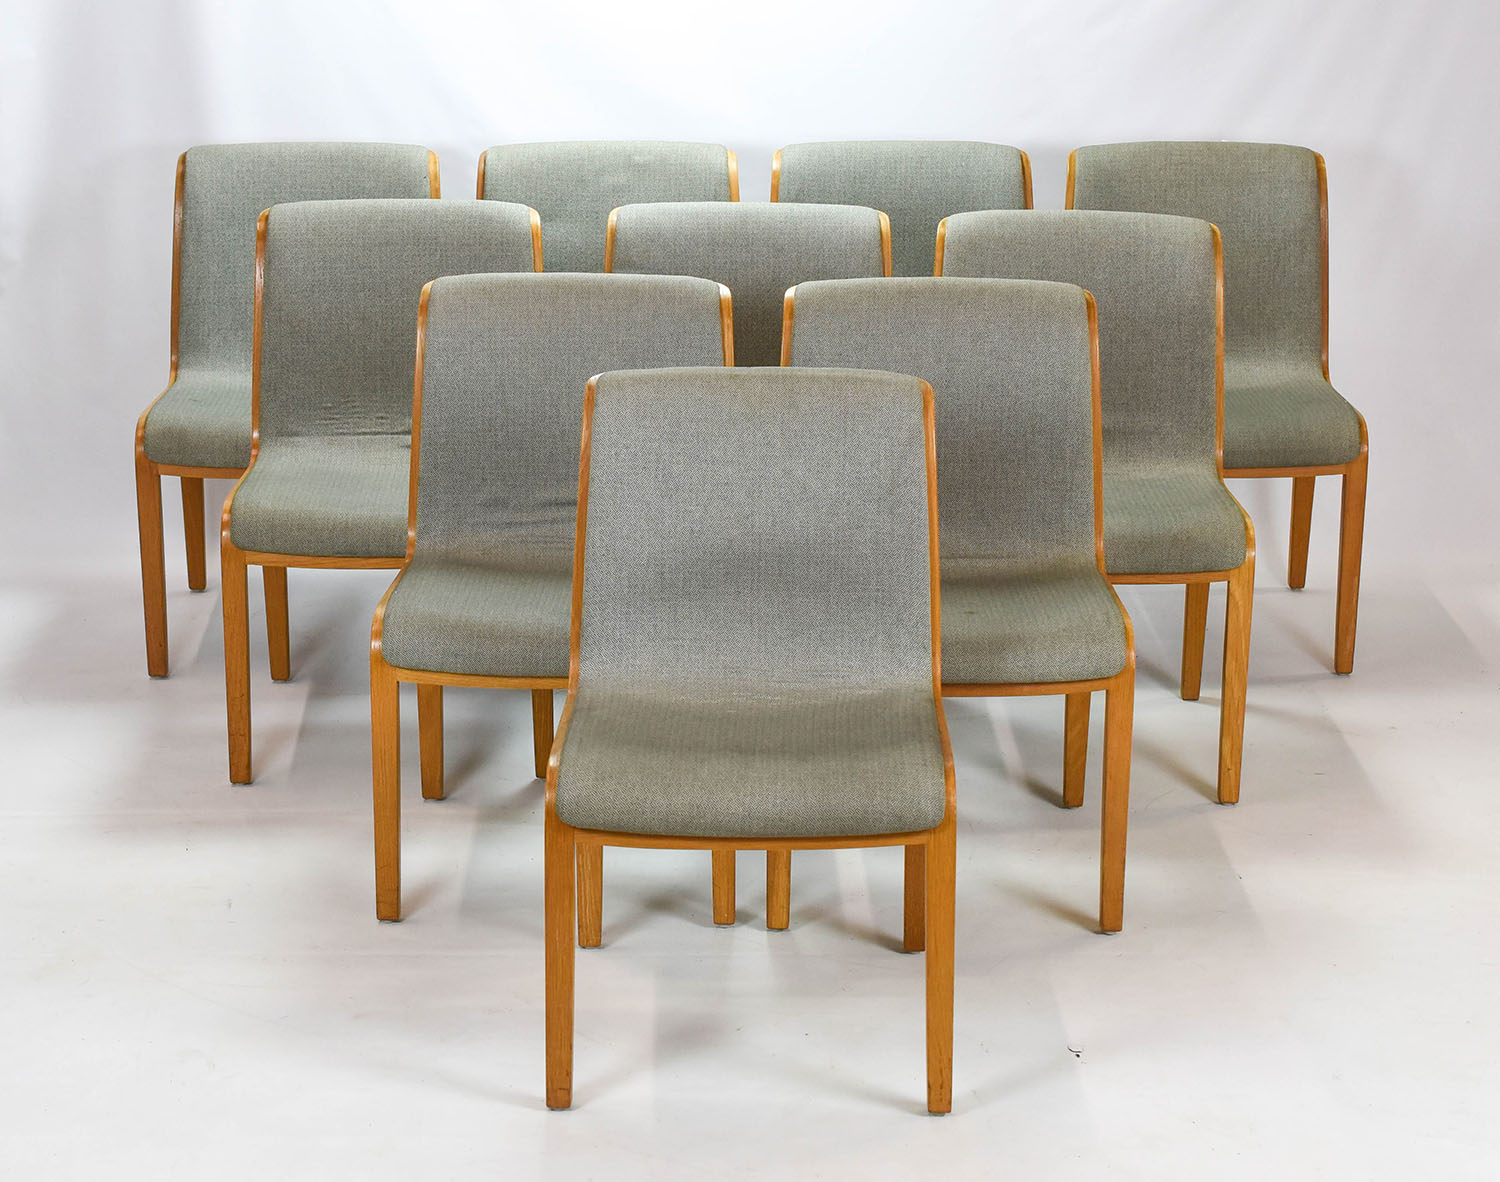 10 Knoll Bent Wood Dining Room Chairs Bill Stephens